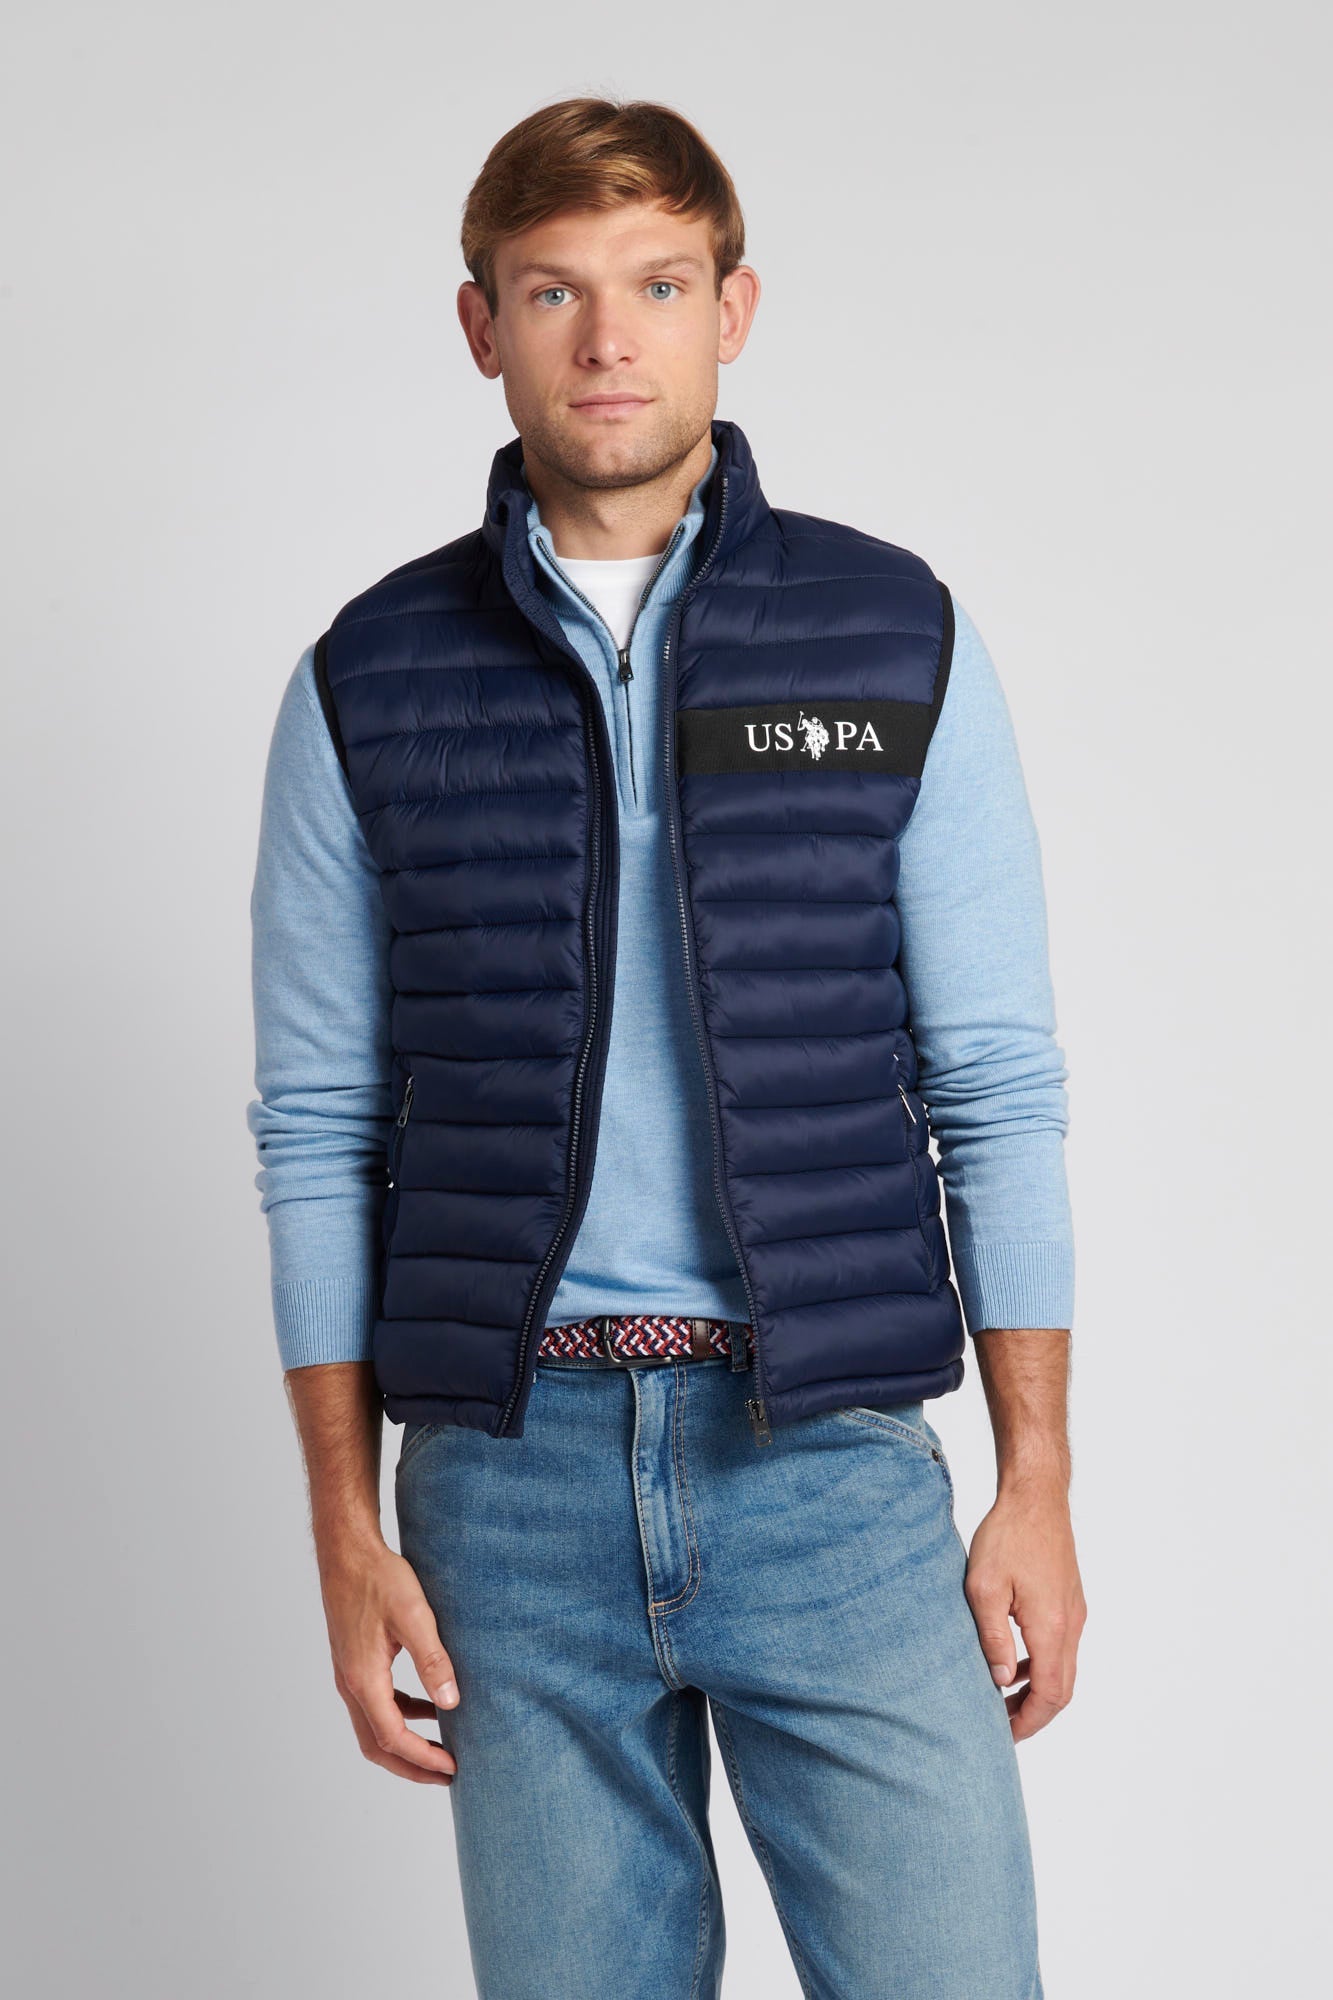 U.S. Polo Assn. Mens Lightweight Quilted Tape Gilet in Navy Blue